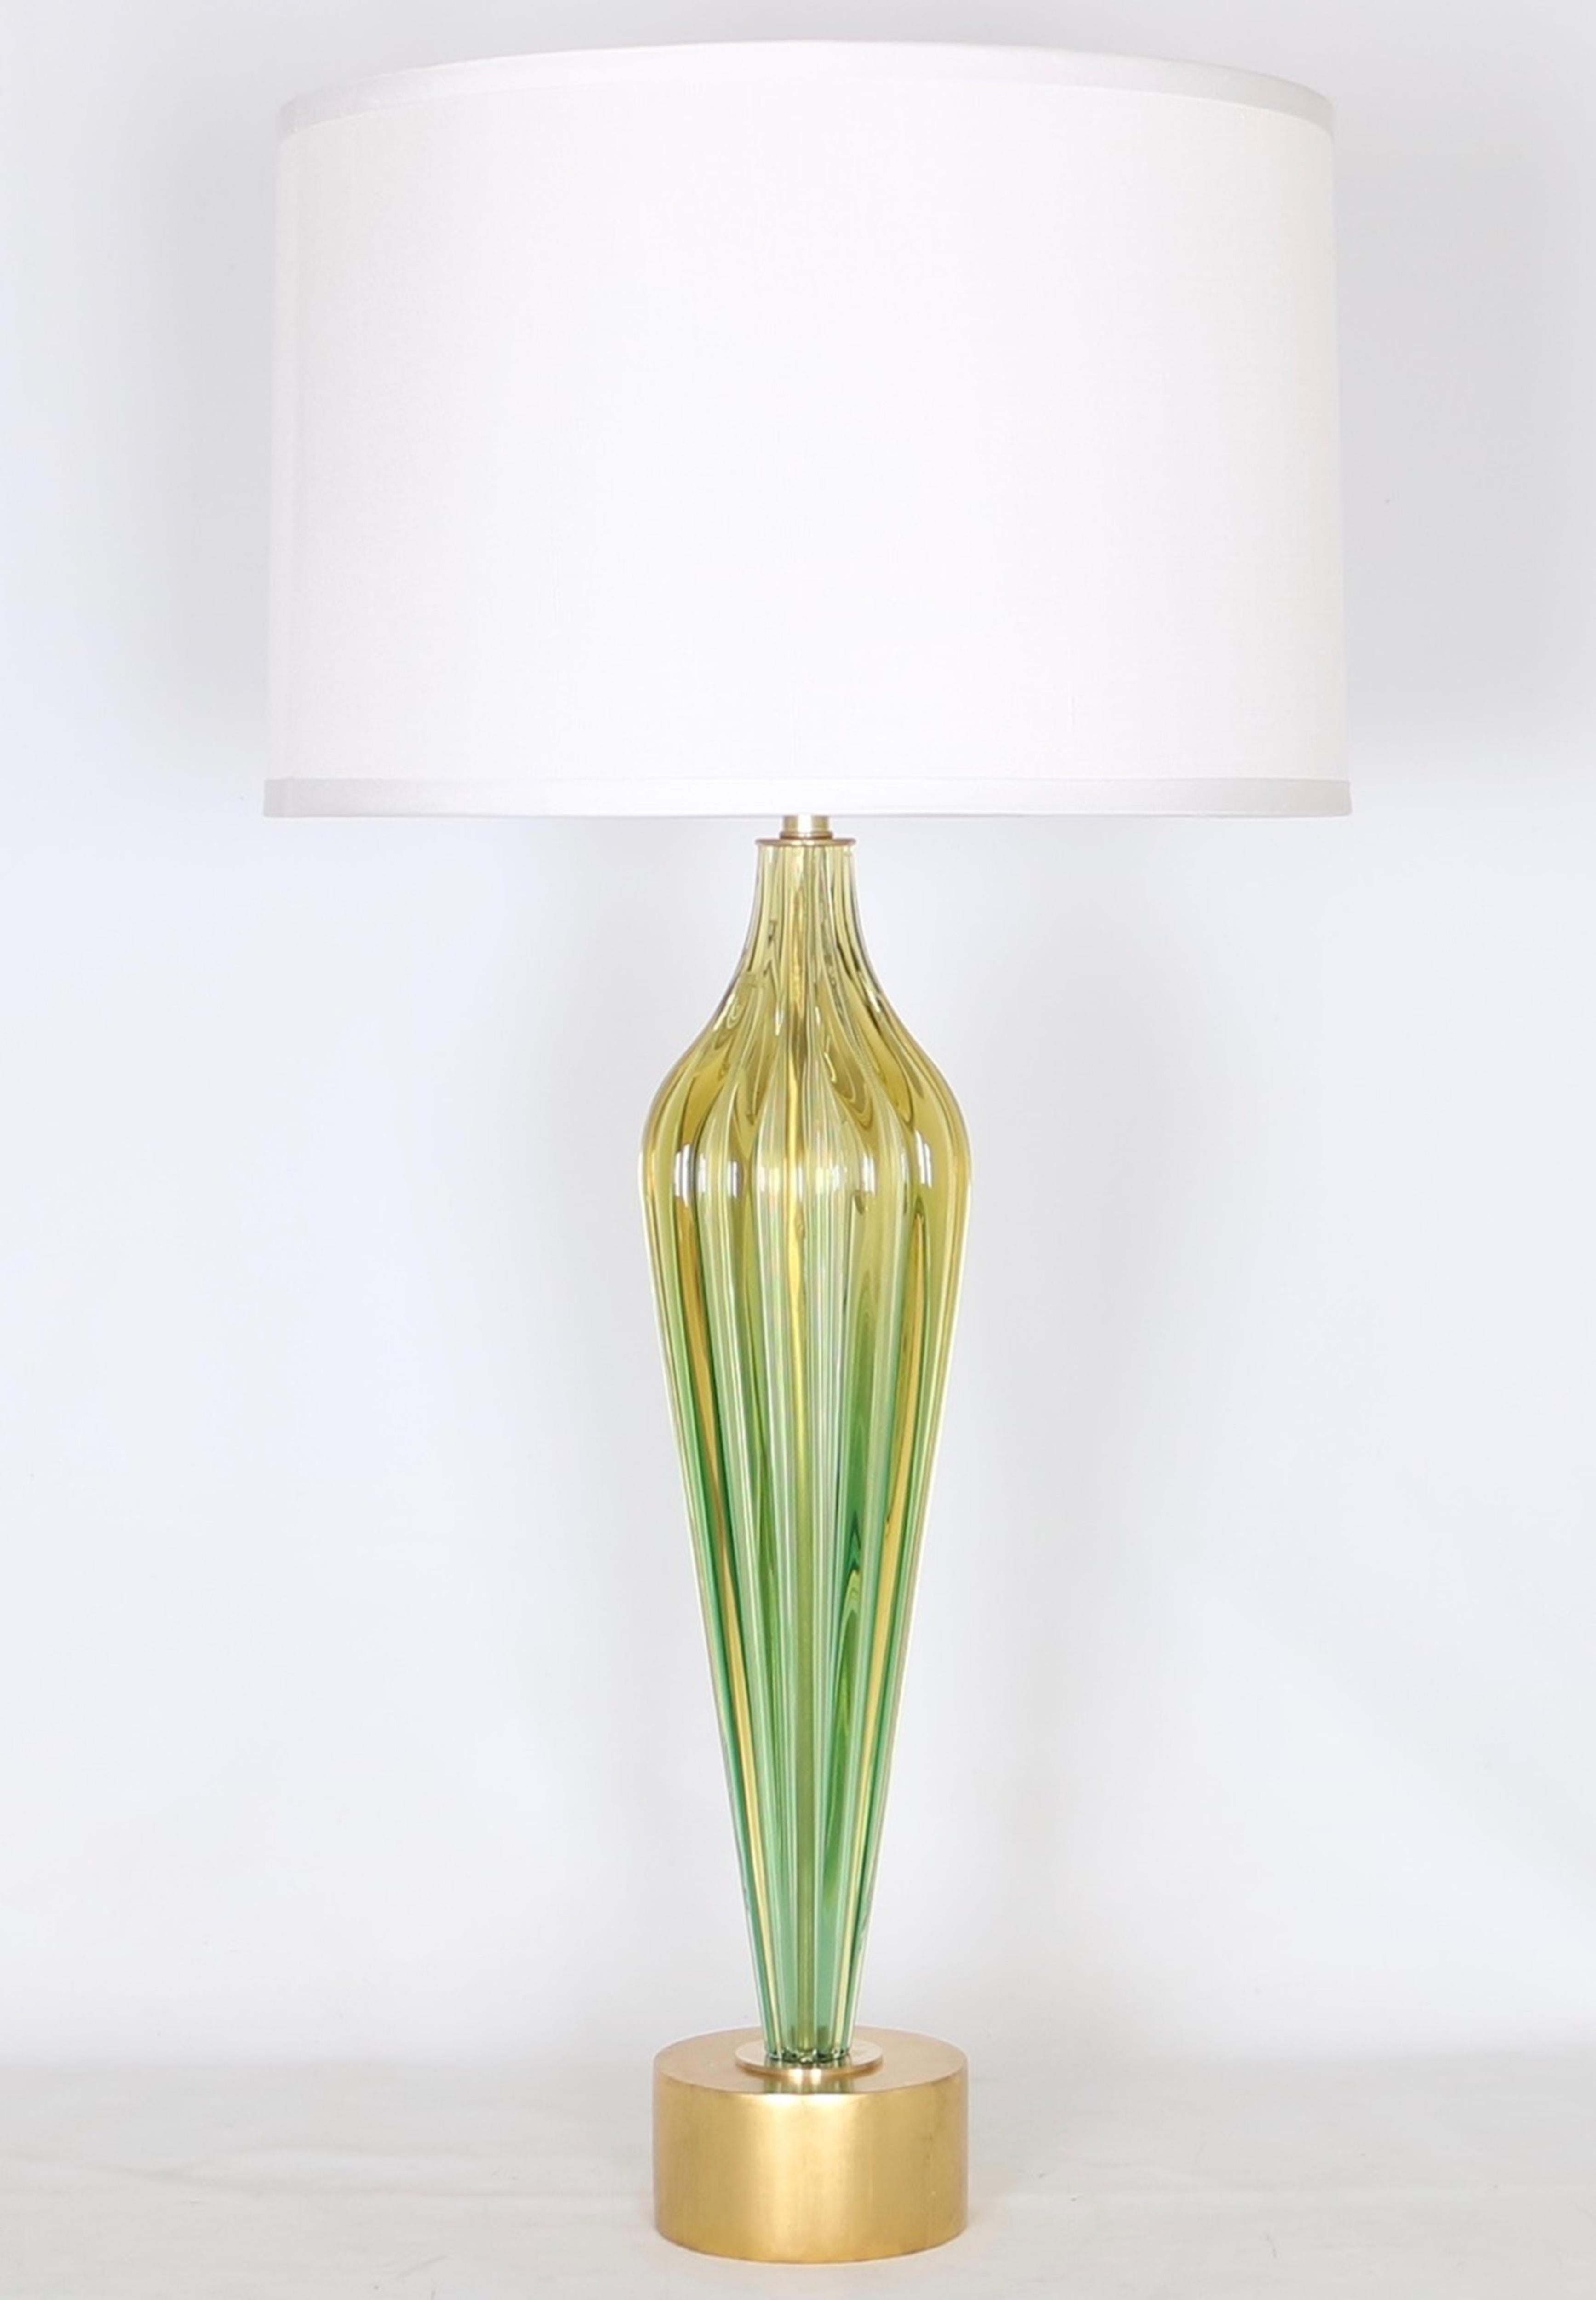 20th Century Hollywood Regency Seguso Lamp in Green and Gold Murano Glass